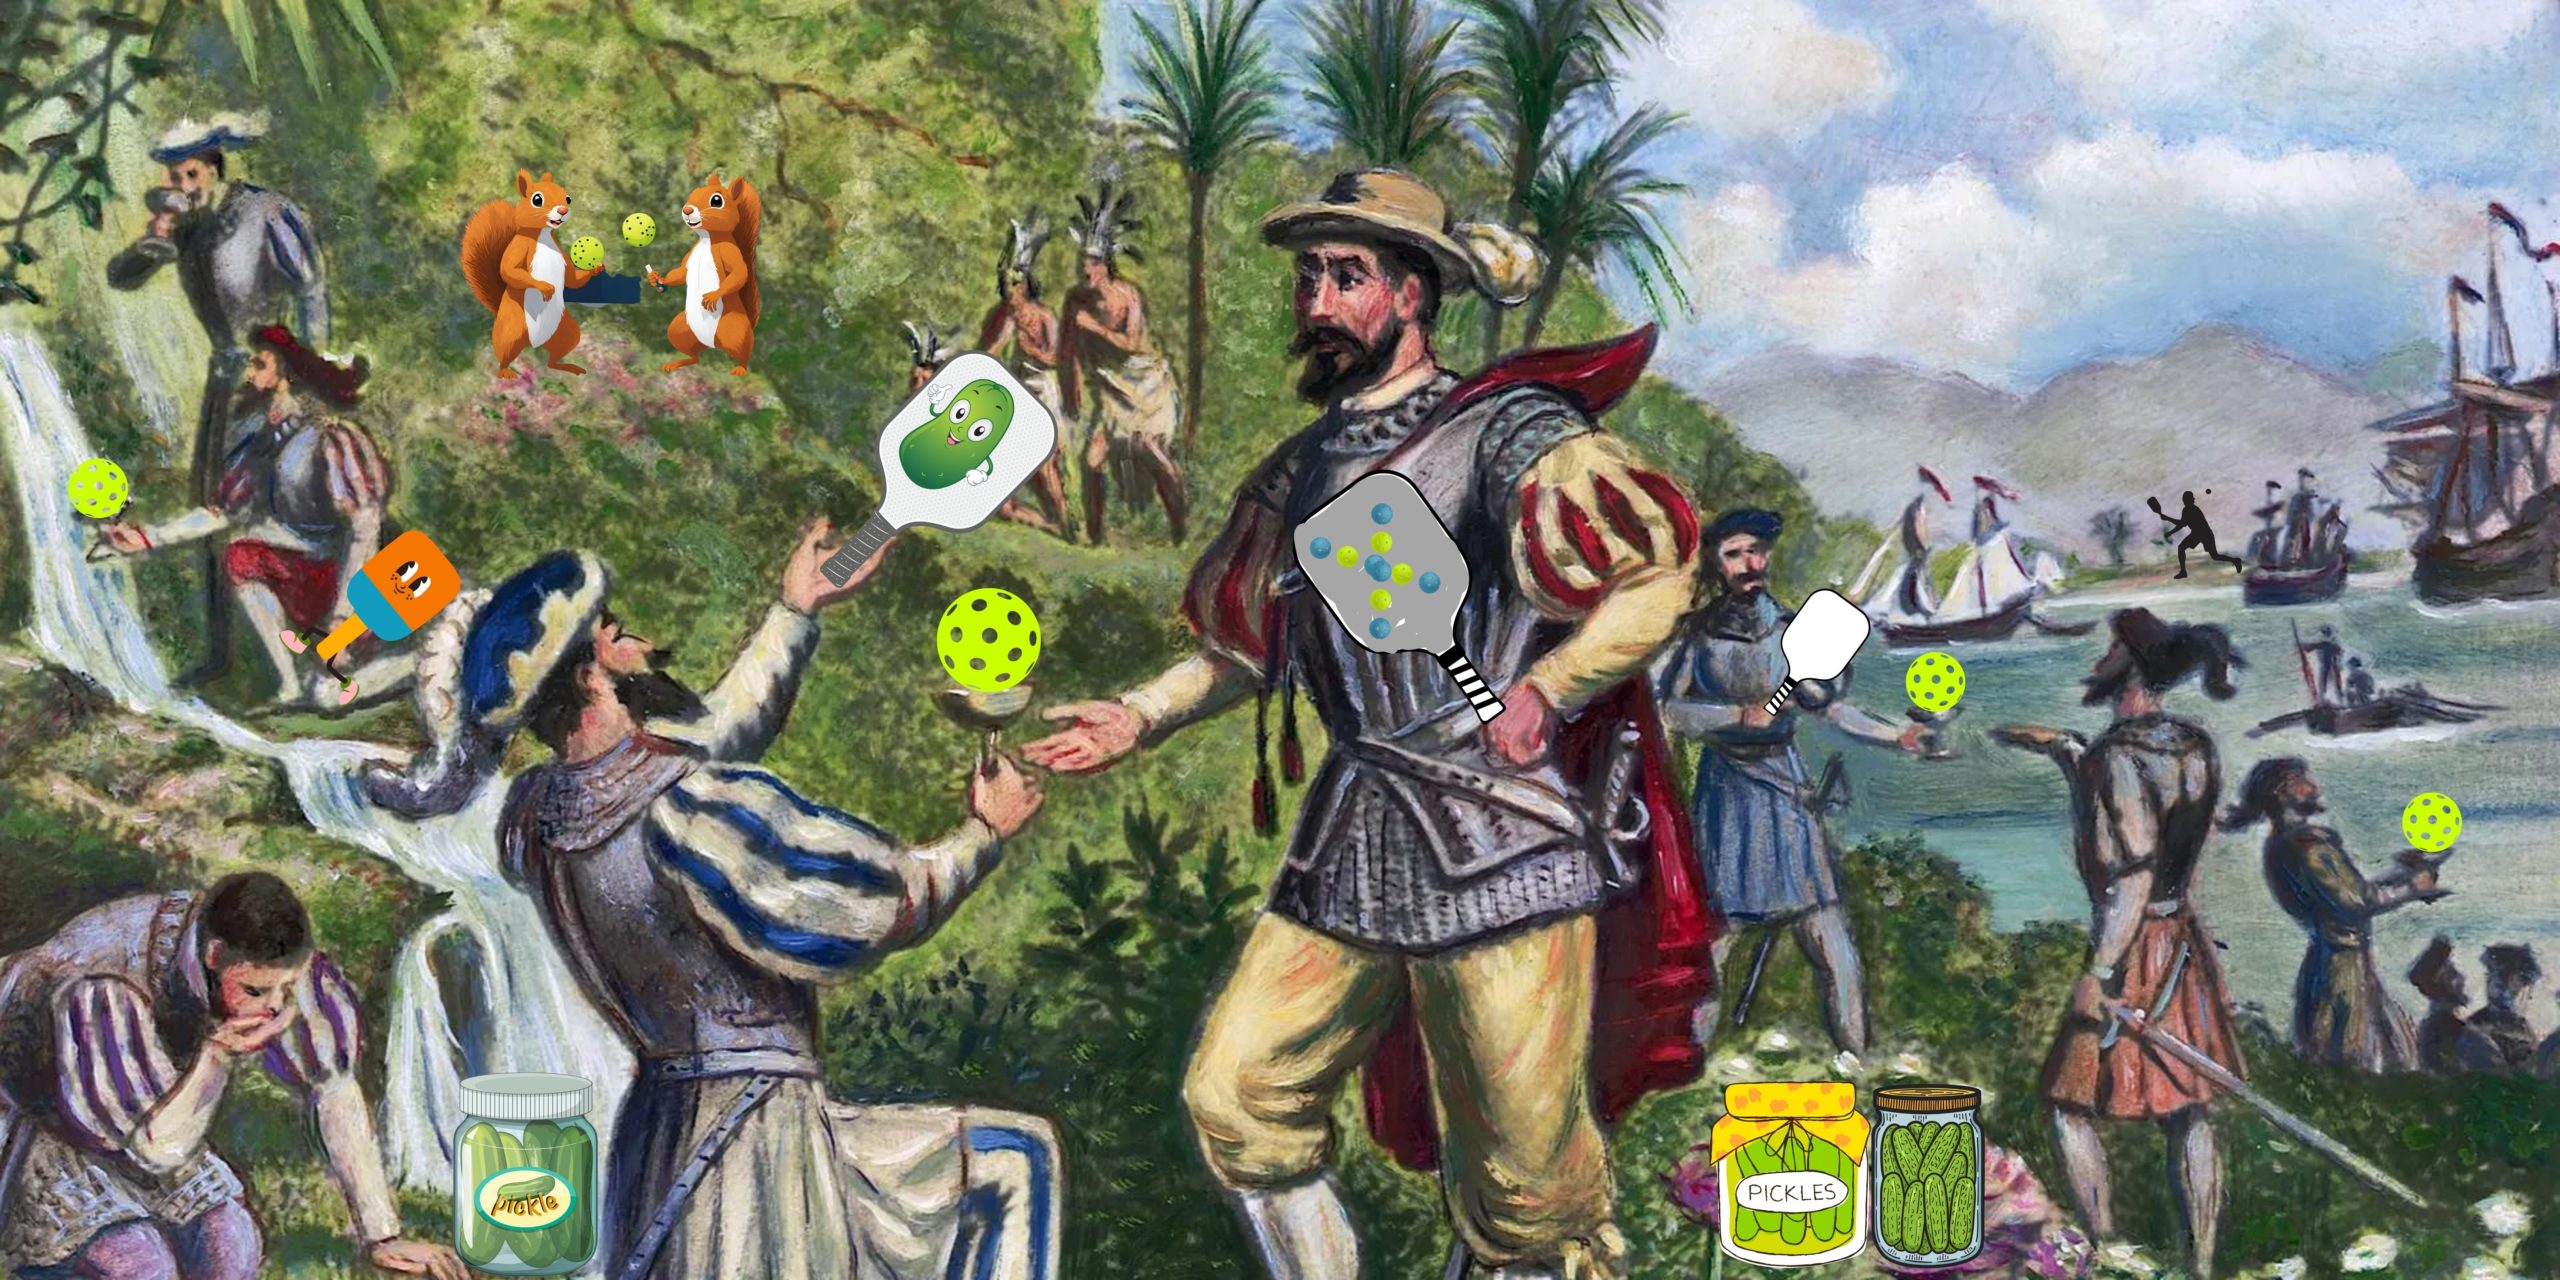 Ponce De Lone discovering pickleball